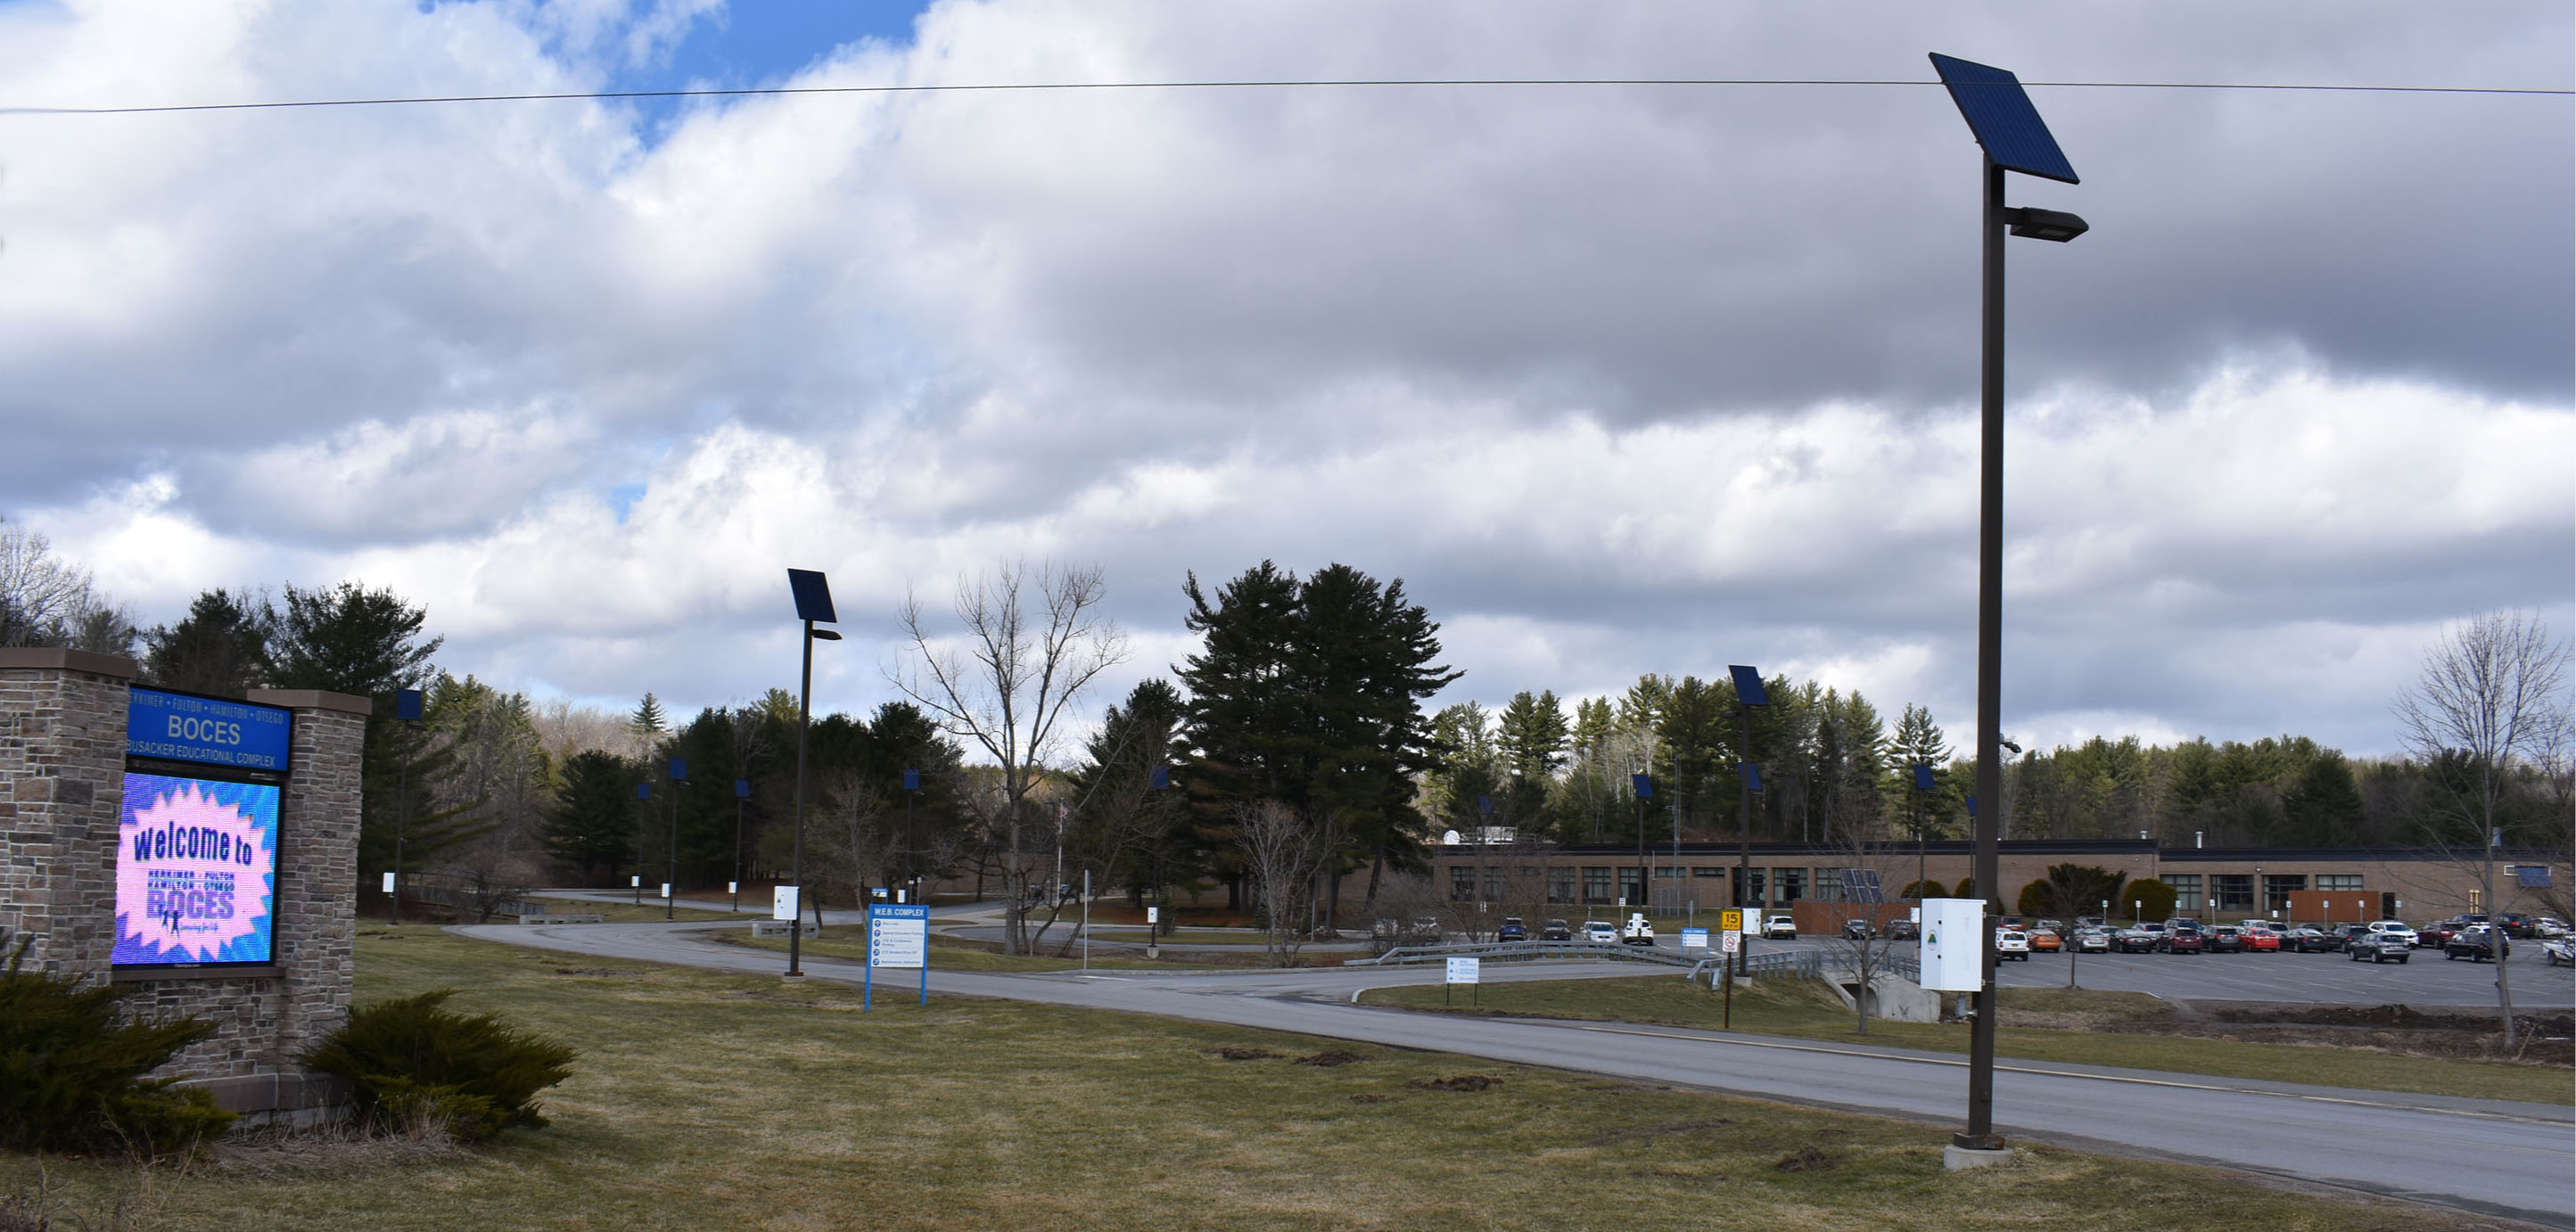 BOCES campus view from the front